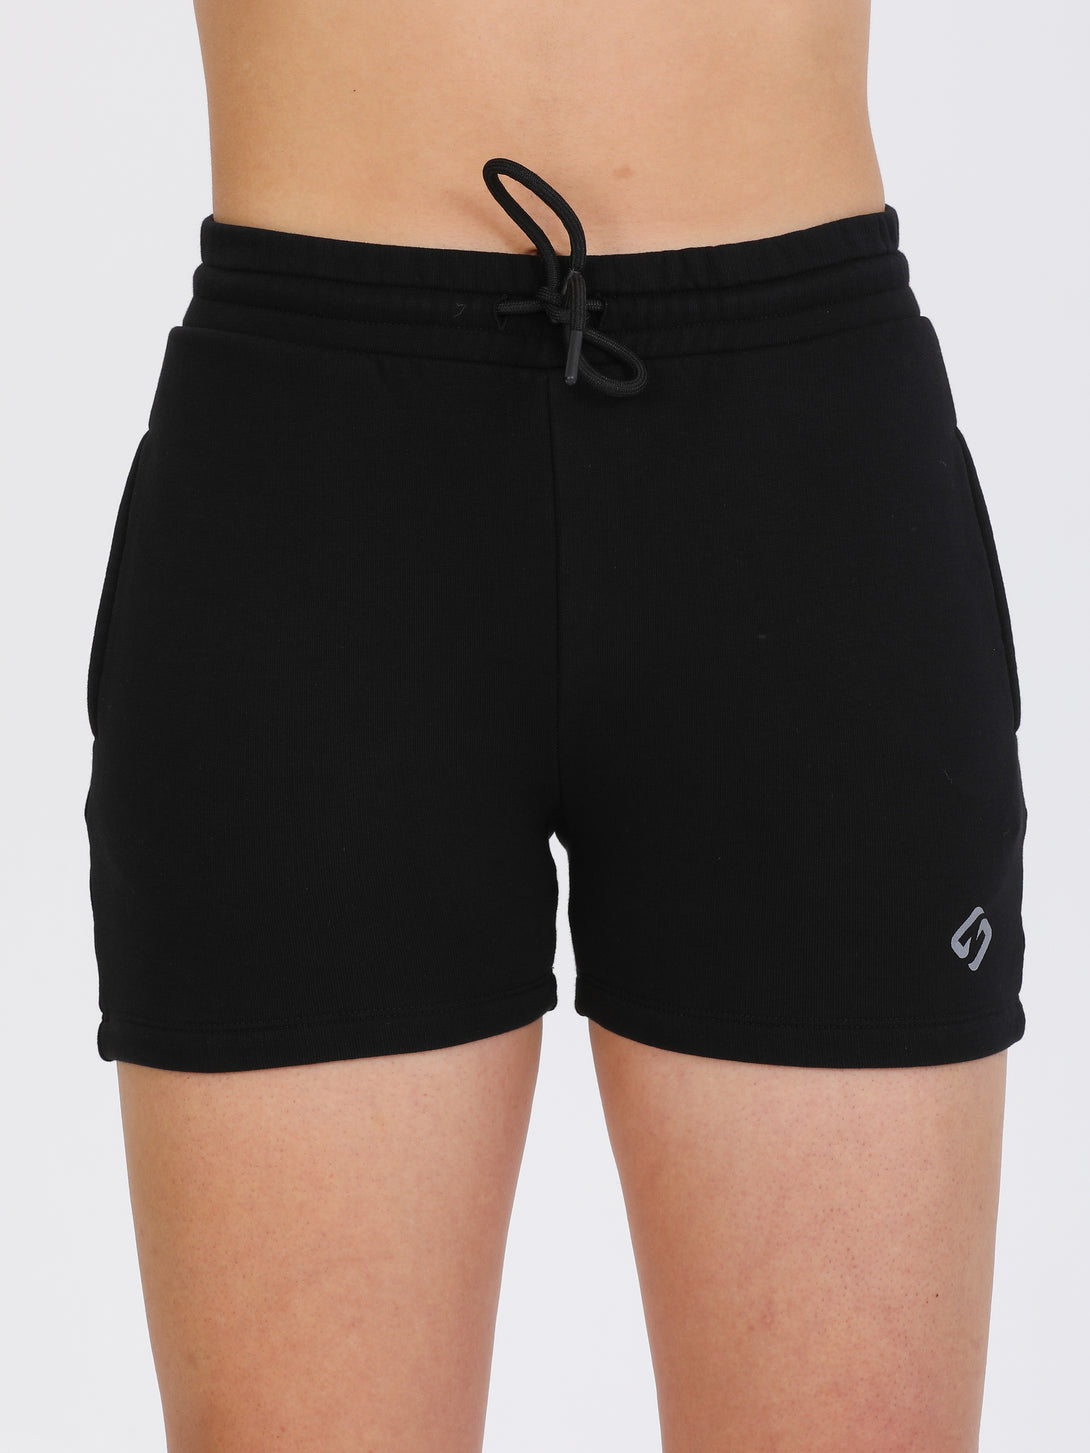 A Woman Wearing Black Color Essential Womens Workout Shorts